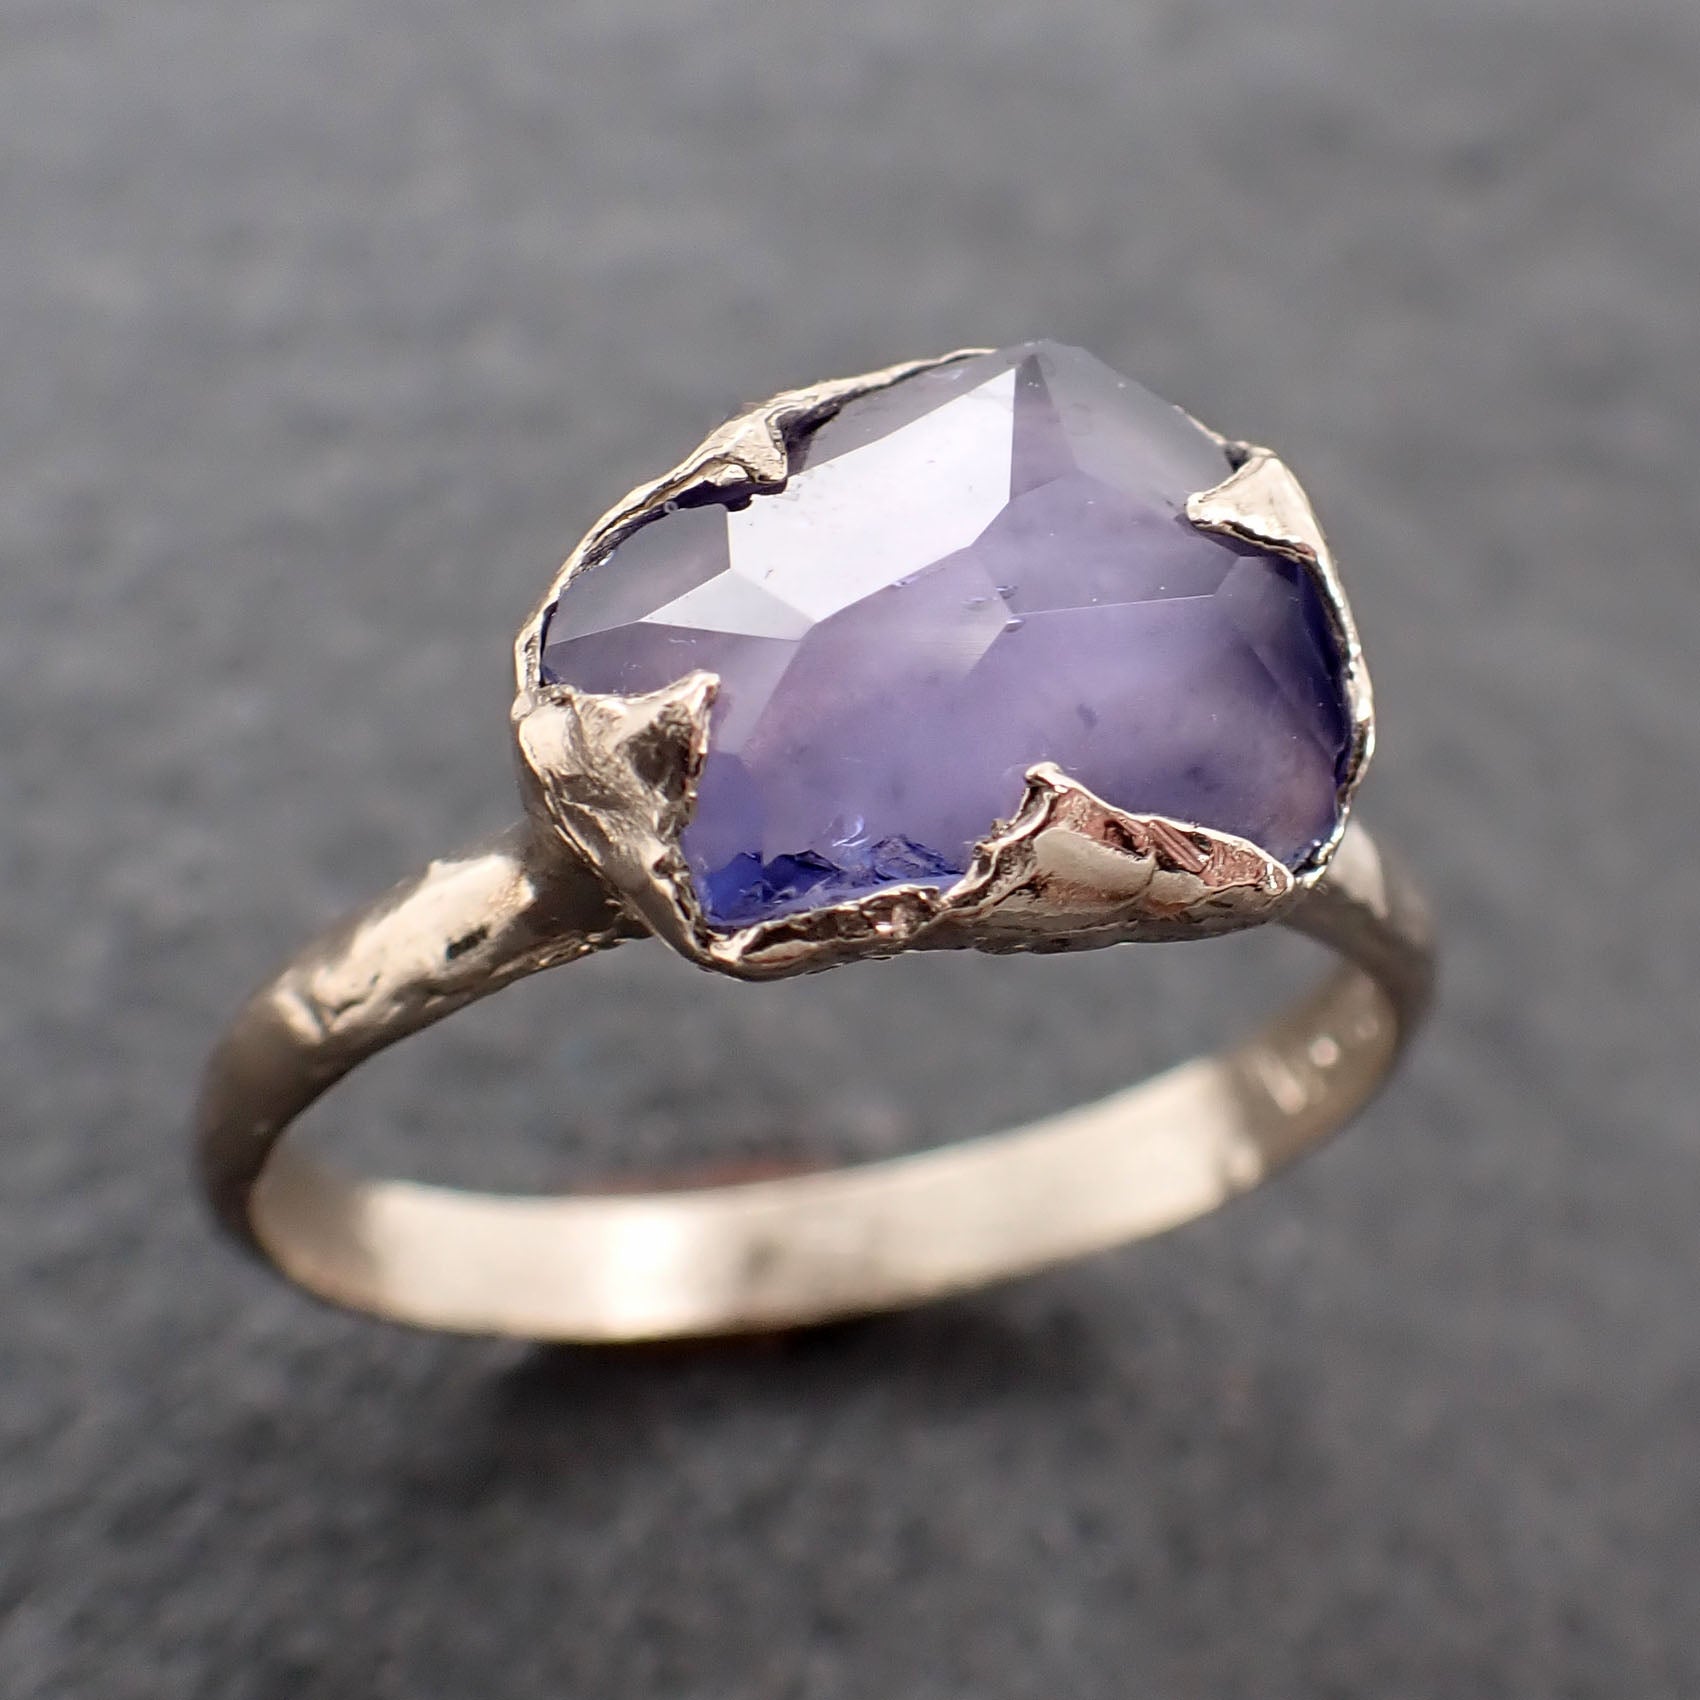 Partially Faceted Lavender Sapphire Solitaire 18k white Gold Engagement Ring Wedding Ring Custom One Of a Kind Gemstone Ring 2393